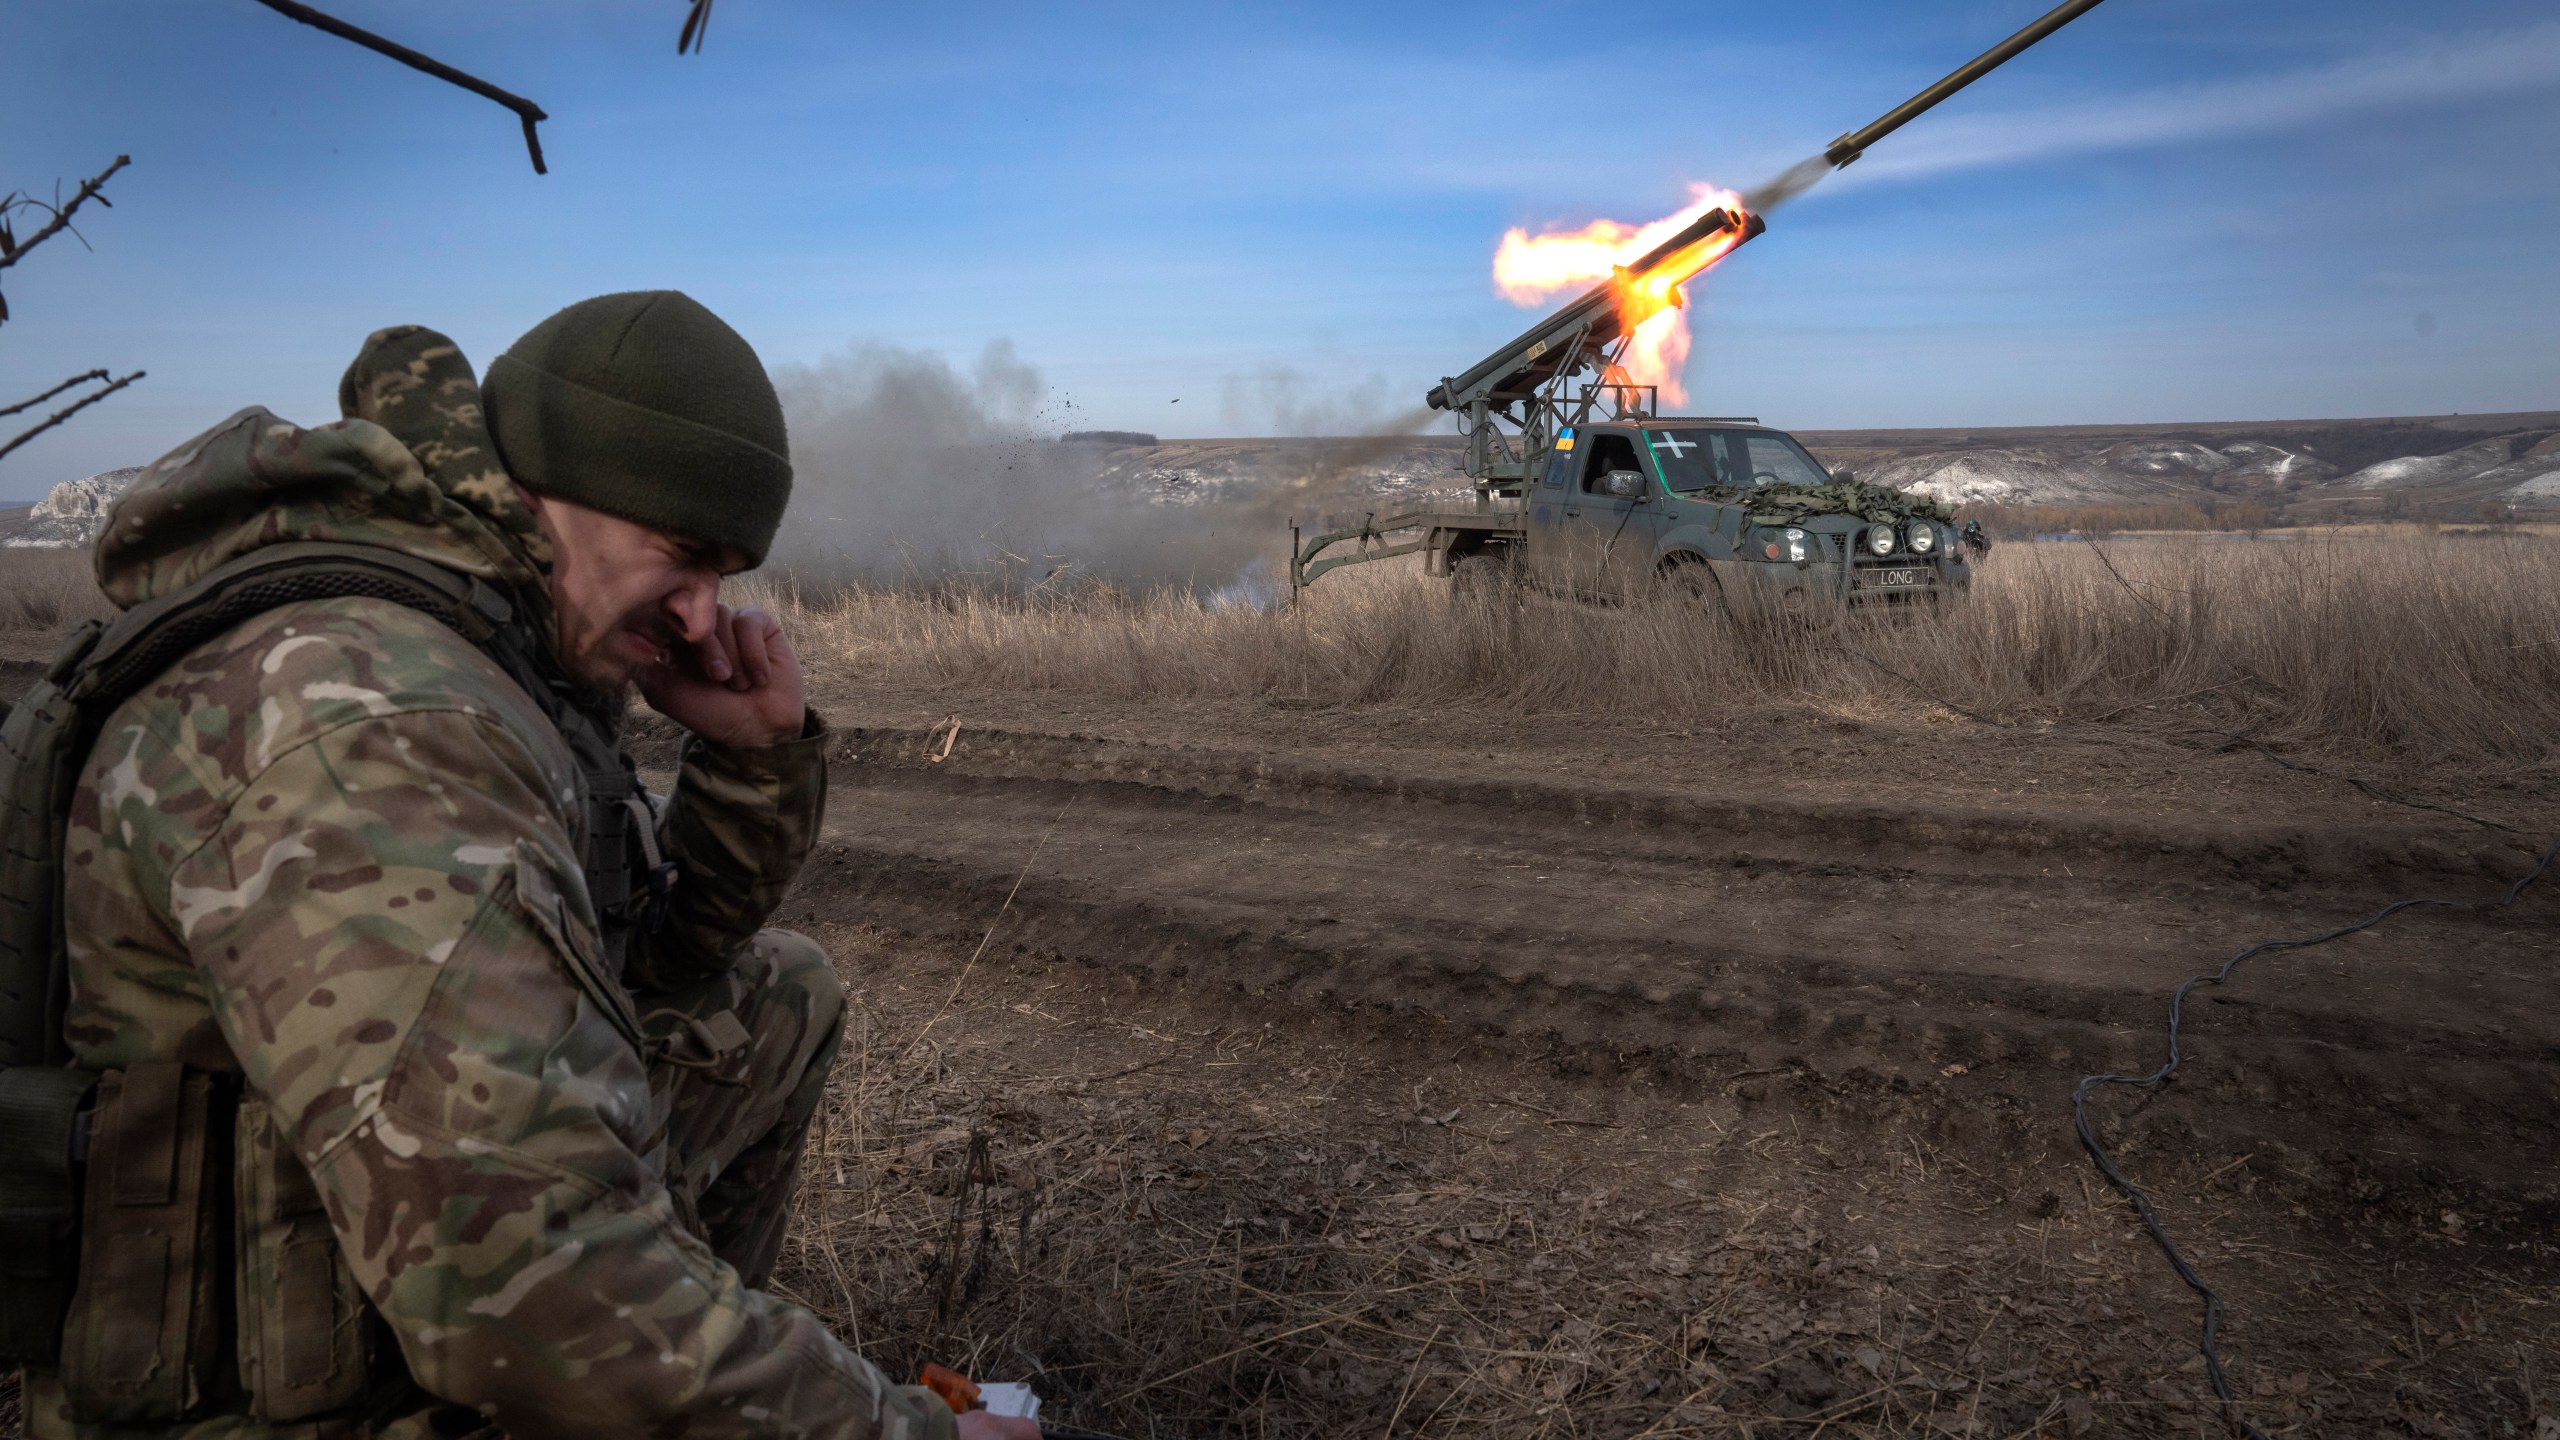 A Ukrainian officer from The 56th Separate Motorized Infantry Mariupol Brigade fires a multiple launch rocket system based on a pickup truck towards Russian positions at the front line, near Bakhmut, Donetsk region, Ukraine, Tuesday, March 5, 2024. (AP Photo/Efrem Lukatsky)